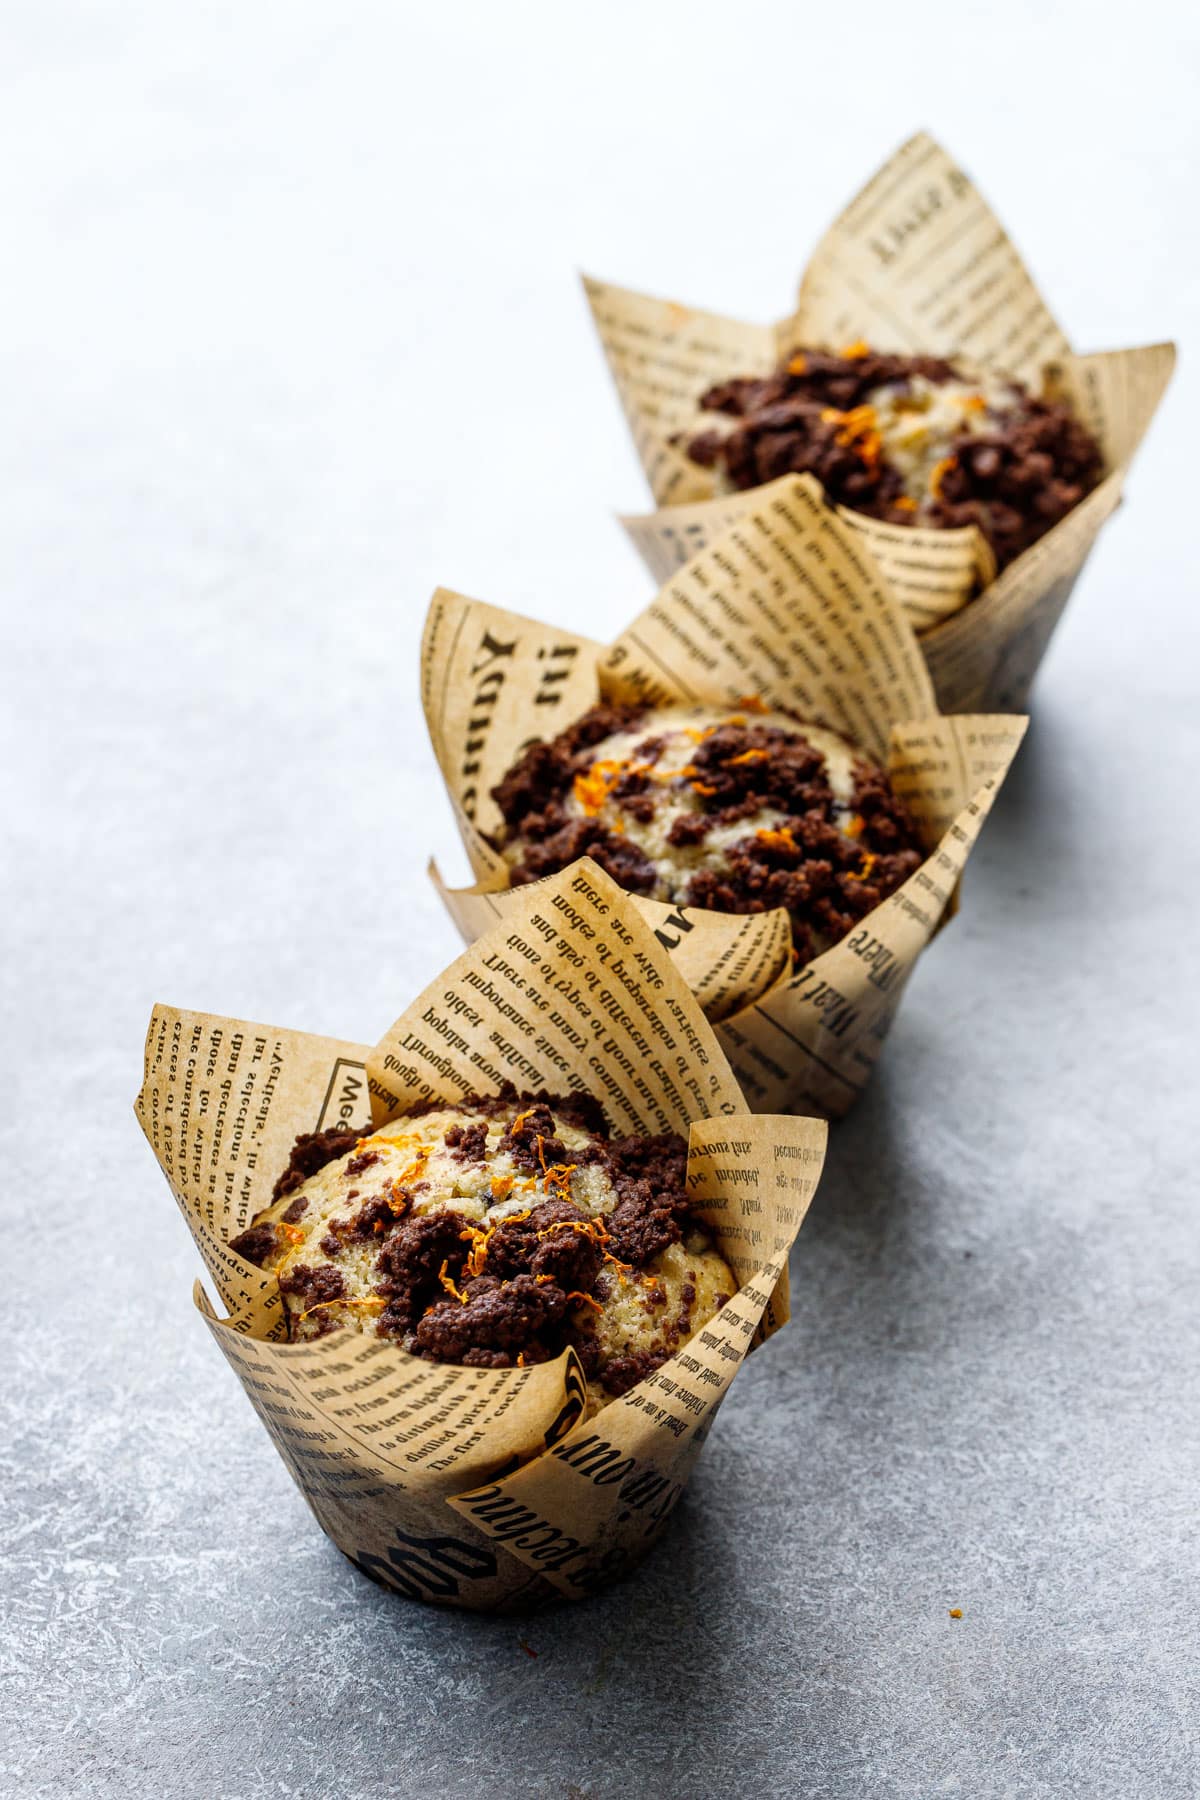 Row of Chocolate Orange Muffins with chocolate streusel on top, on a gray background, baked in newsprint tulip wrappers.